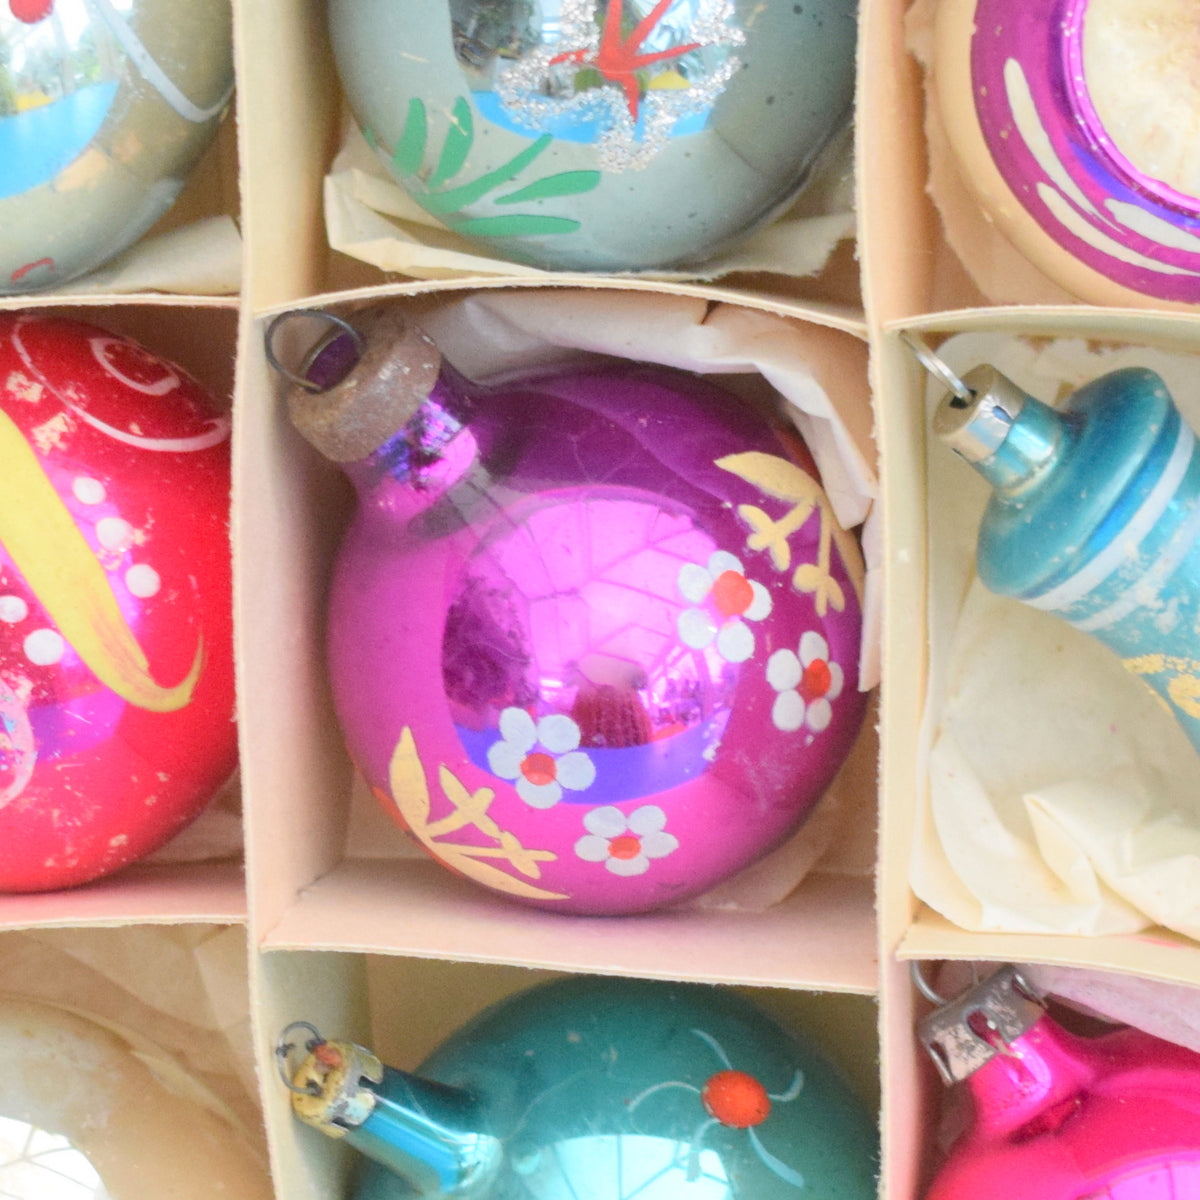 Vintage 1950s Hand Painted Medium Glass Christmas Baubles / Decorations - Pink / Purple / Blue / Silver (Boxed)